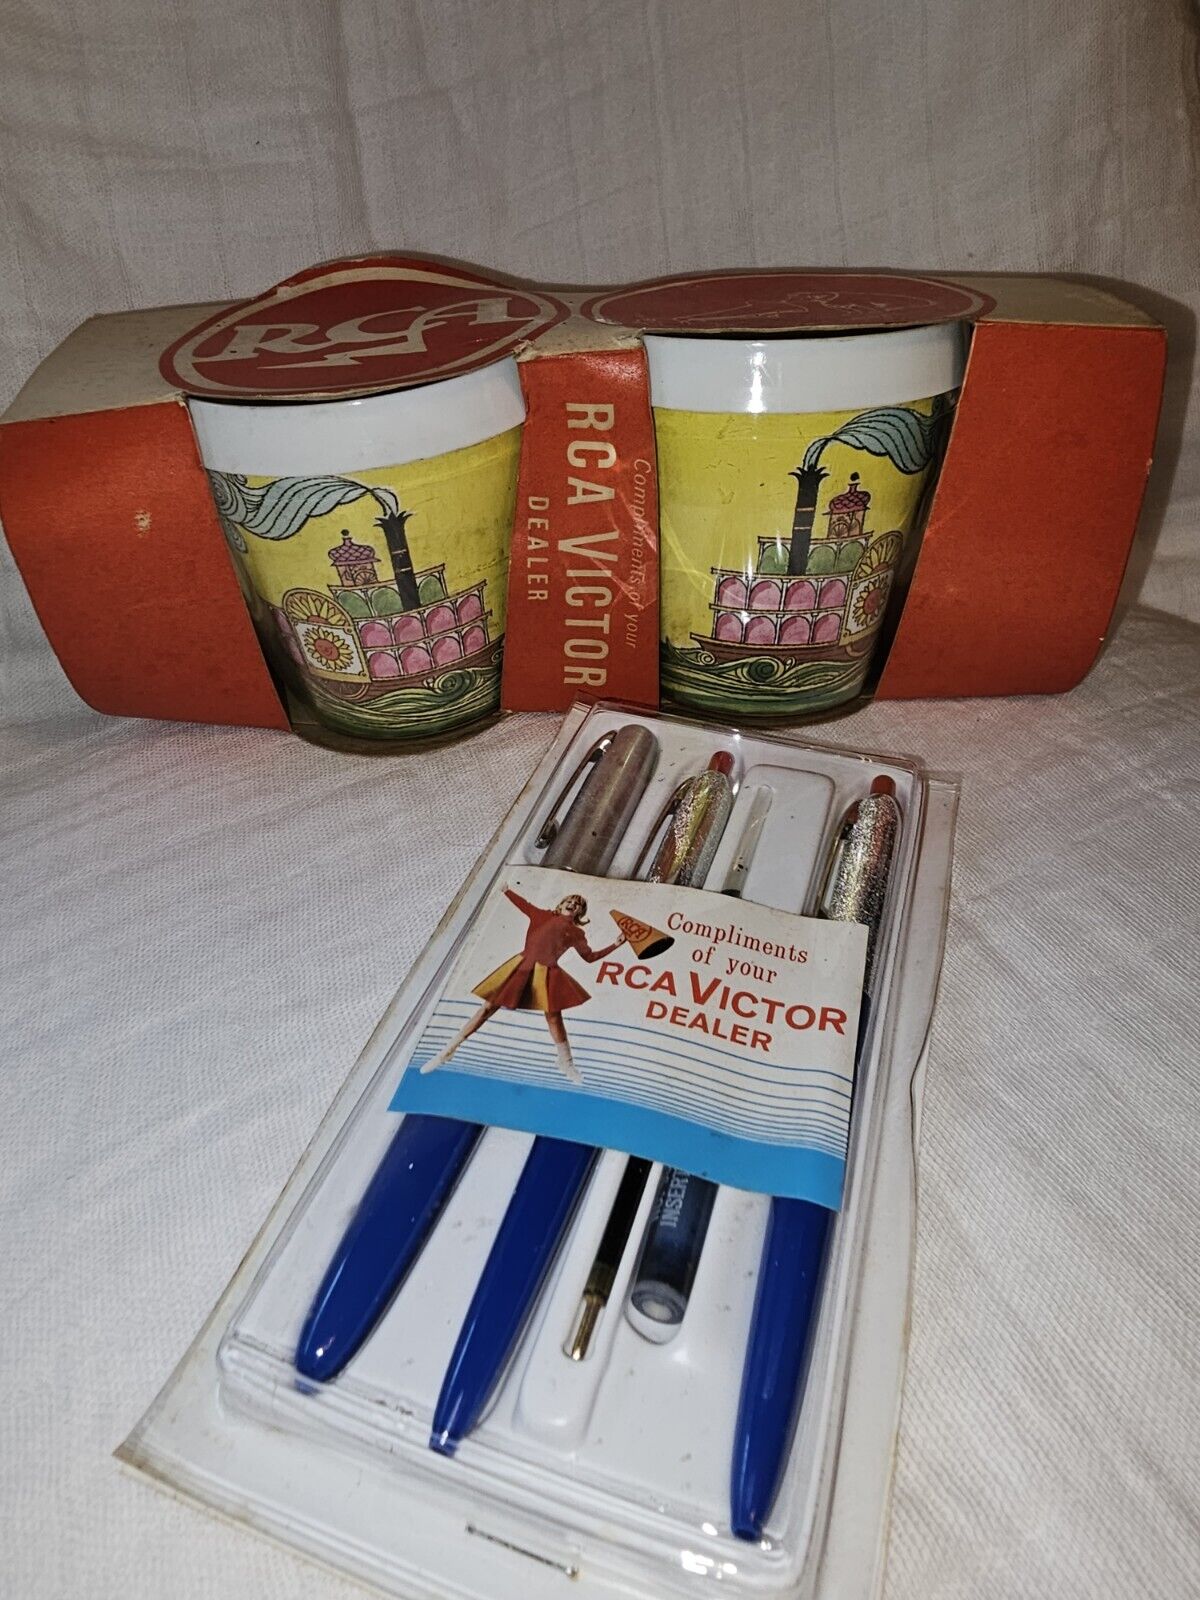 Two Vintage RCA Victor dealer complimentary gifts - Insulated Mugs & Pen set 